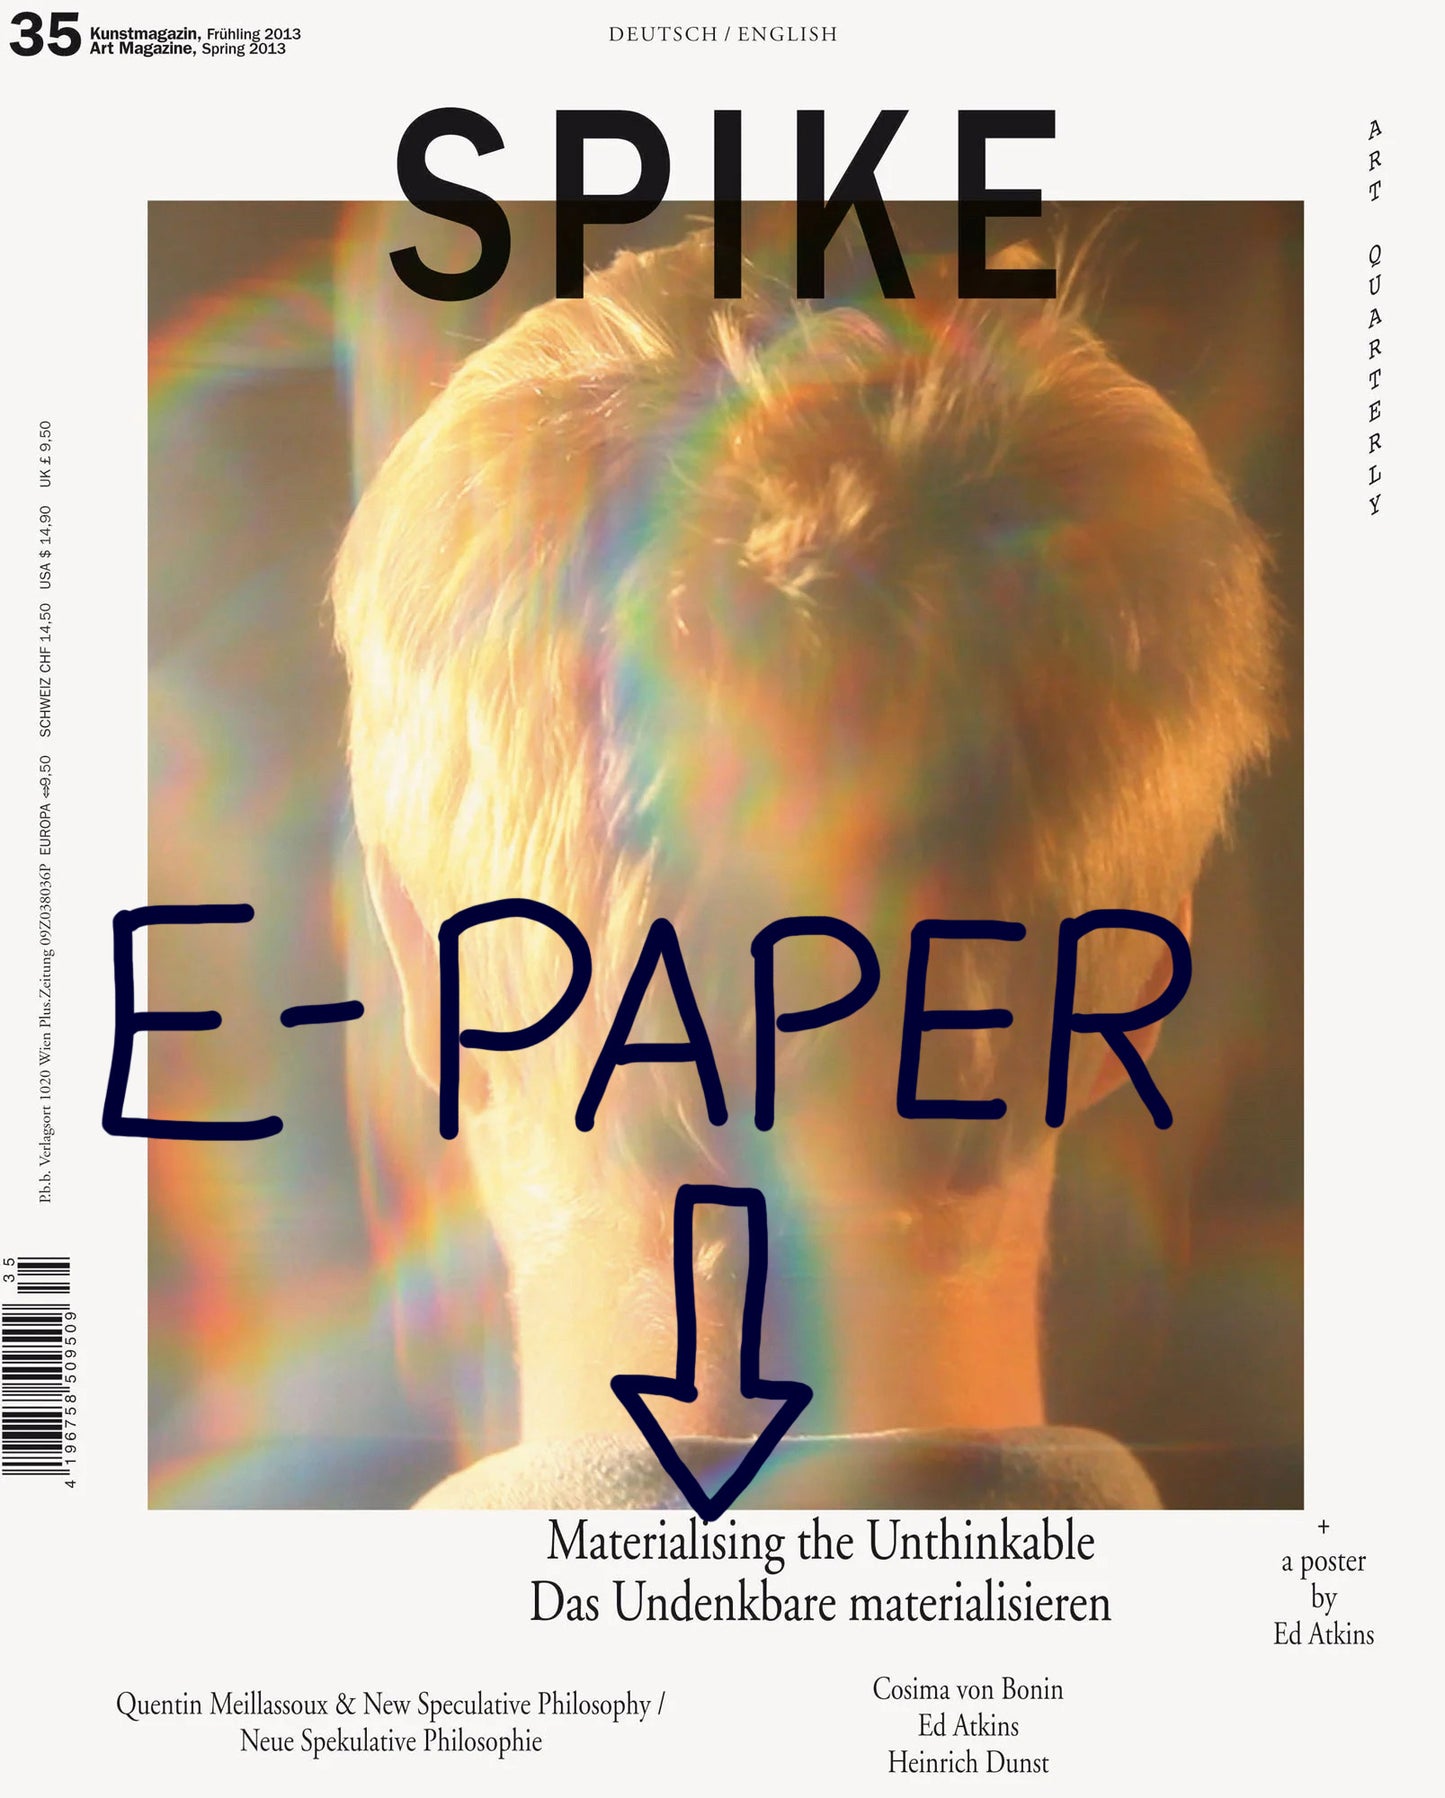 Spike ePaper (Issue 35): Materialising the Unthinkable